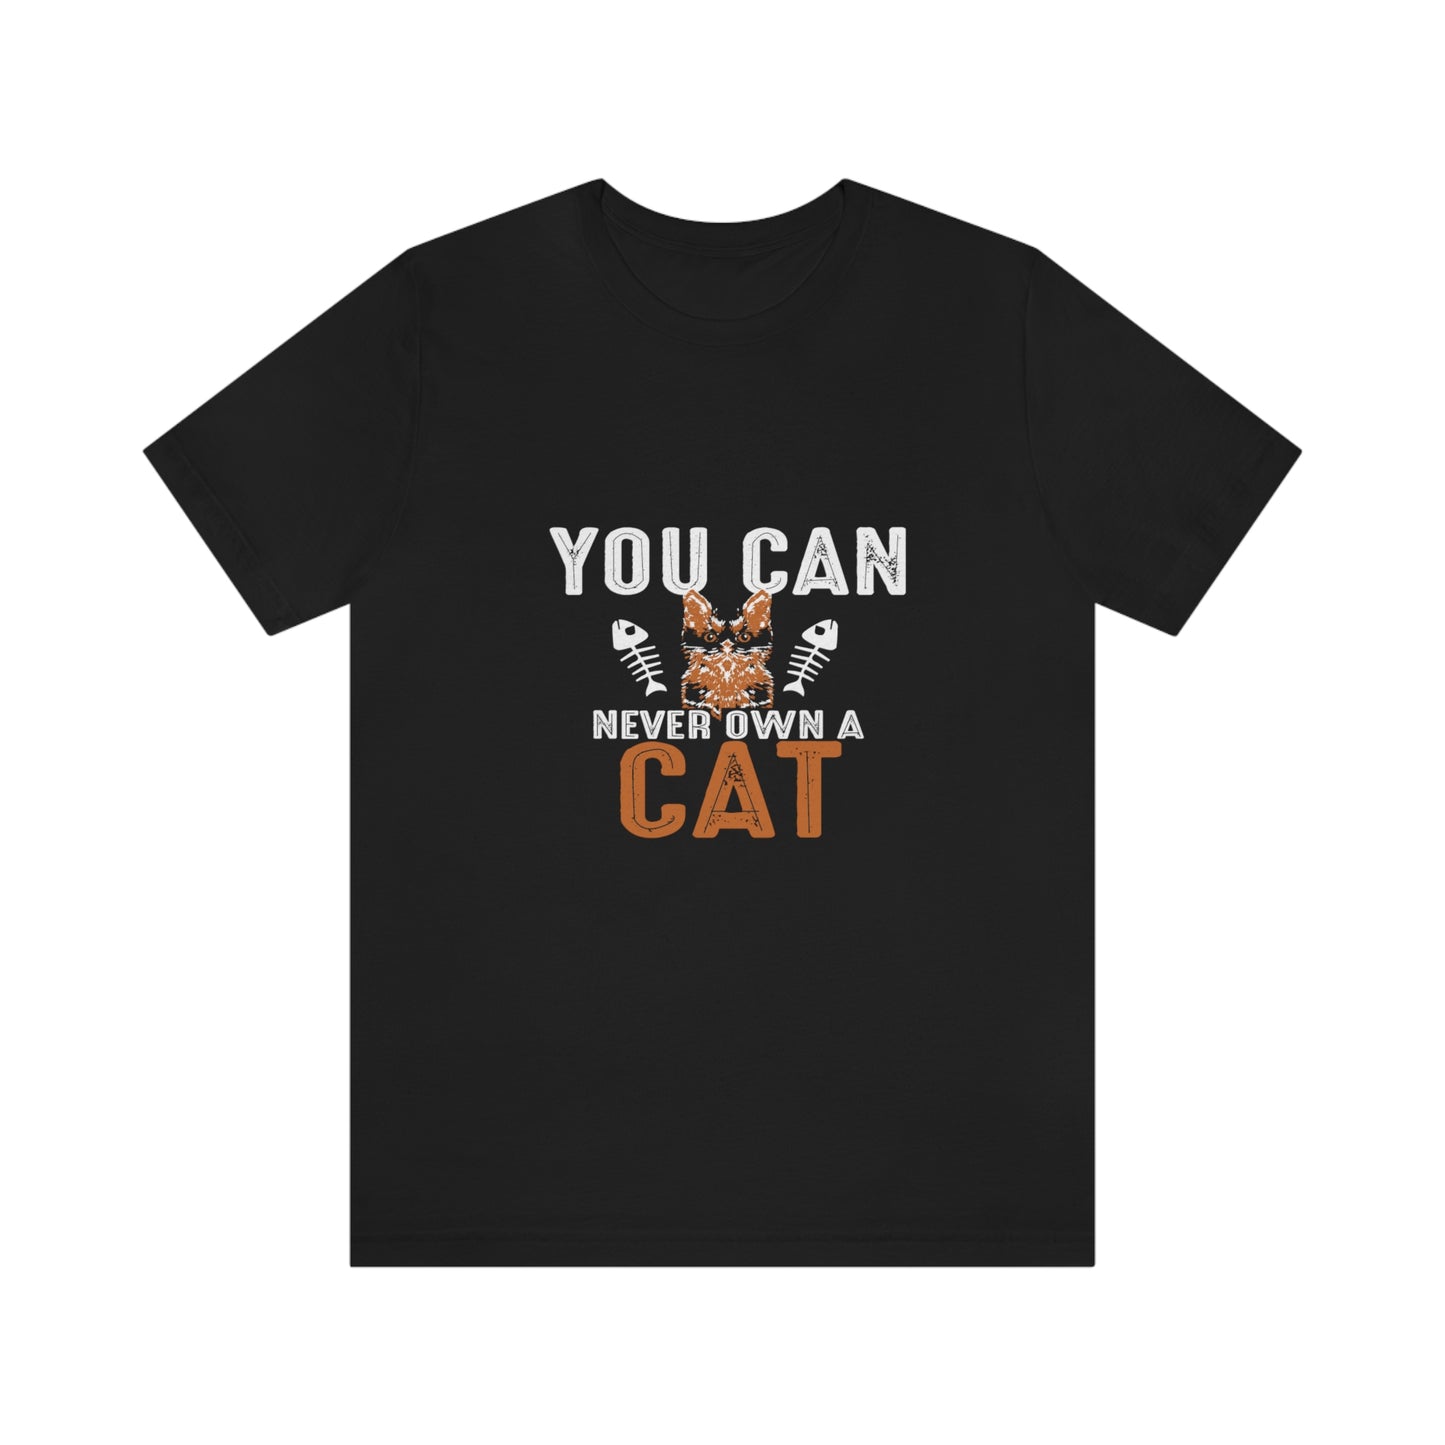 You Can Never Own A Cat - Unisex T-Shirt